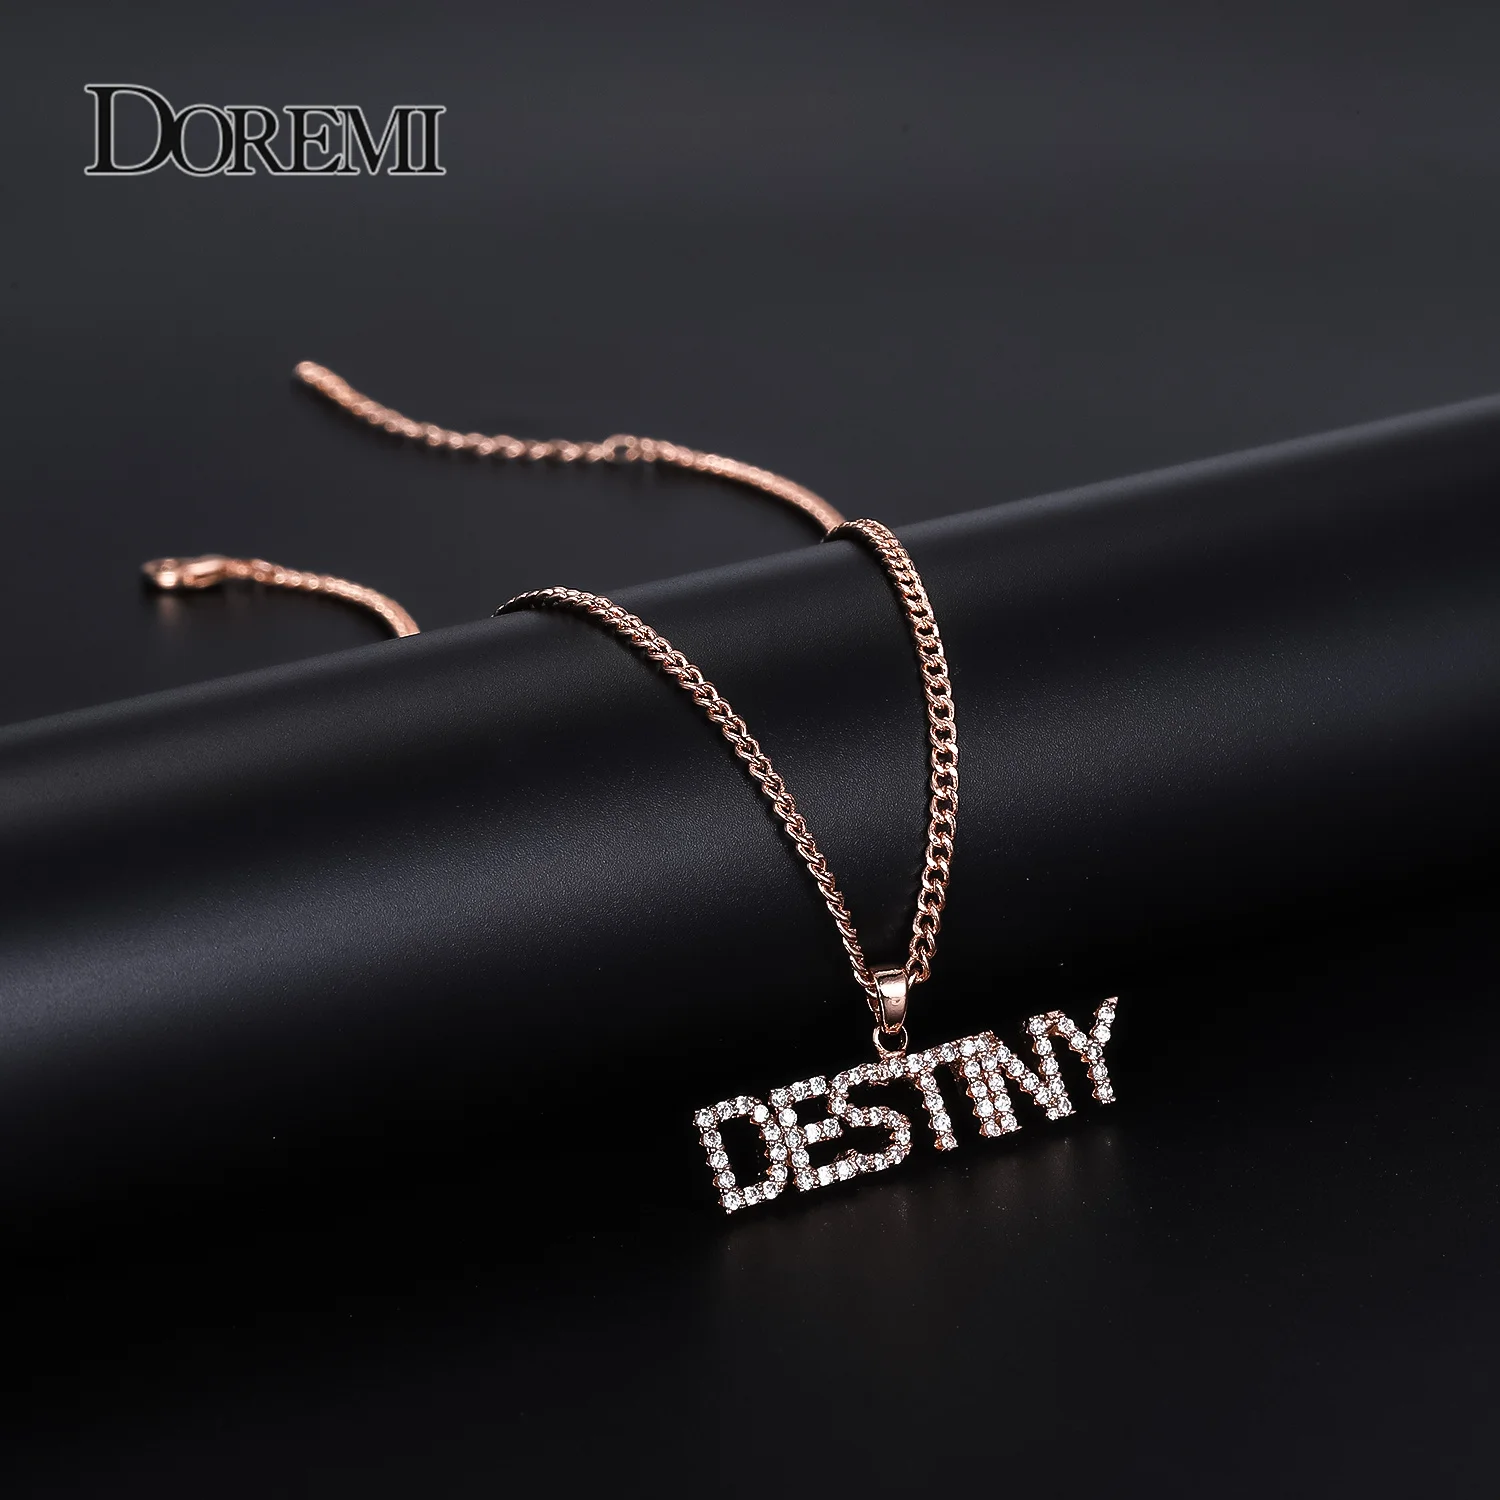 DOREMI 3A Zircon Personalized Custom Name Necklace for Women Men Pendant Stone Chain Zirconia Necklace With 4mm Cuban Chain diamond finger bit milling bit enlarge grinding hole dia 6 30mm with 5 8 11 thread for tile stone countertop